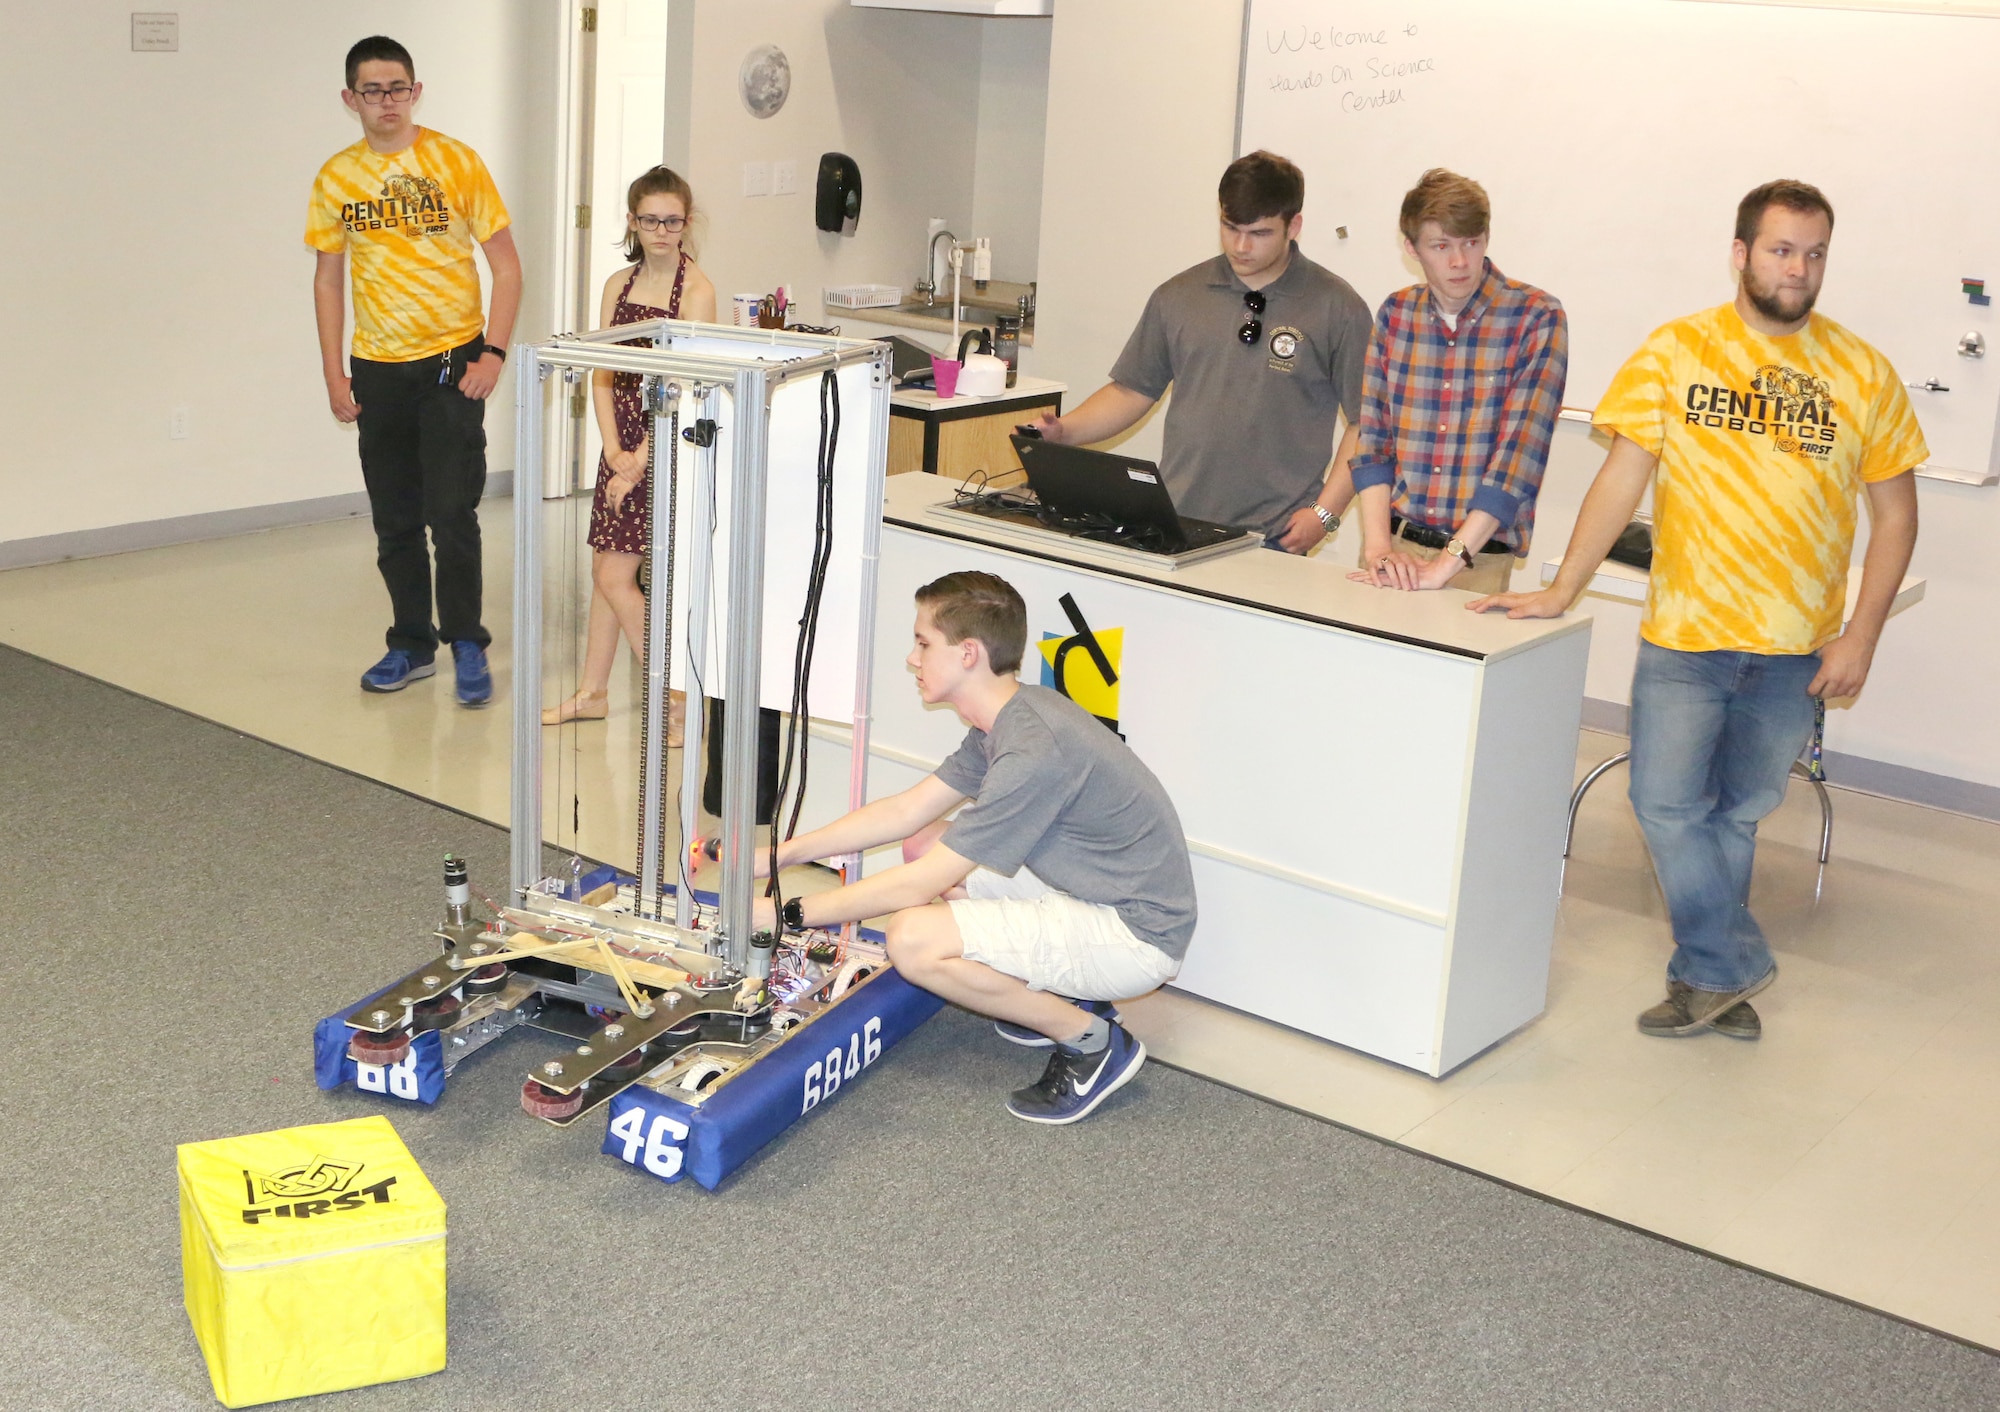 Central Magnet Robotics team member David Schafer adjusts the robot during the team’s demonstration at the Hands-On Science Center in Tullahoma May 1. Pictured in back, from left to right, are Ethan Davenport, Maddy Perrien, Jimmy Jones, Drew Dove and Aidan Gibson. (U.S. Air Force photo/Deidre Ortiz)